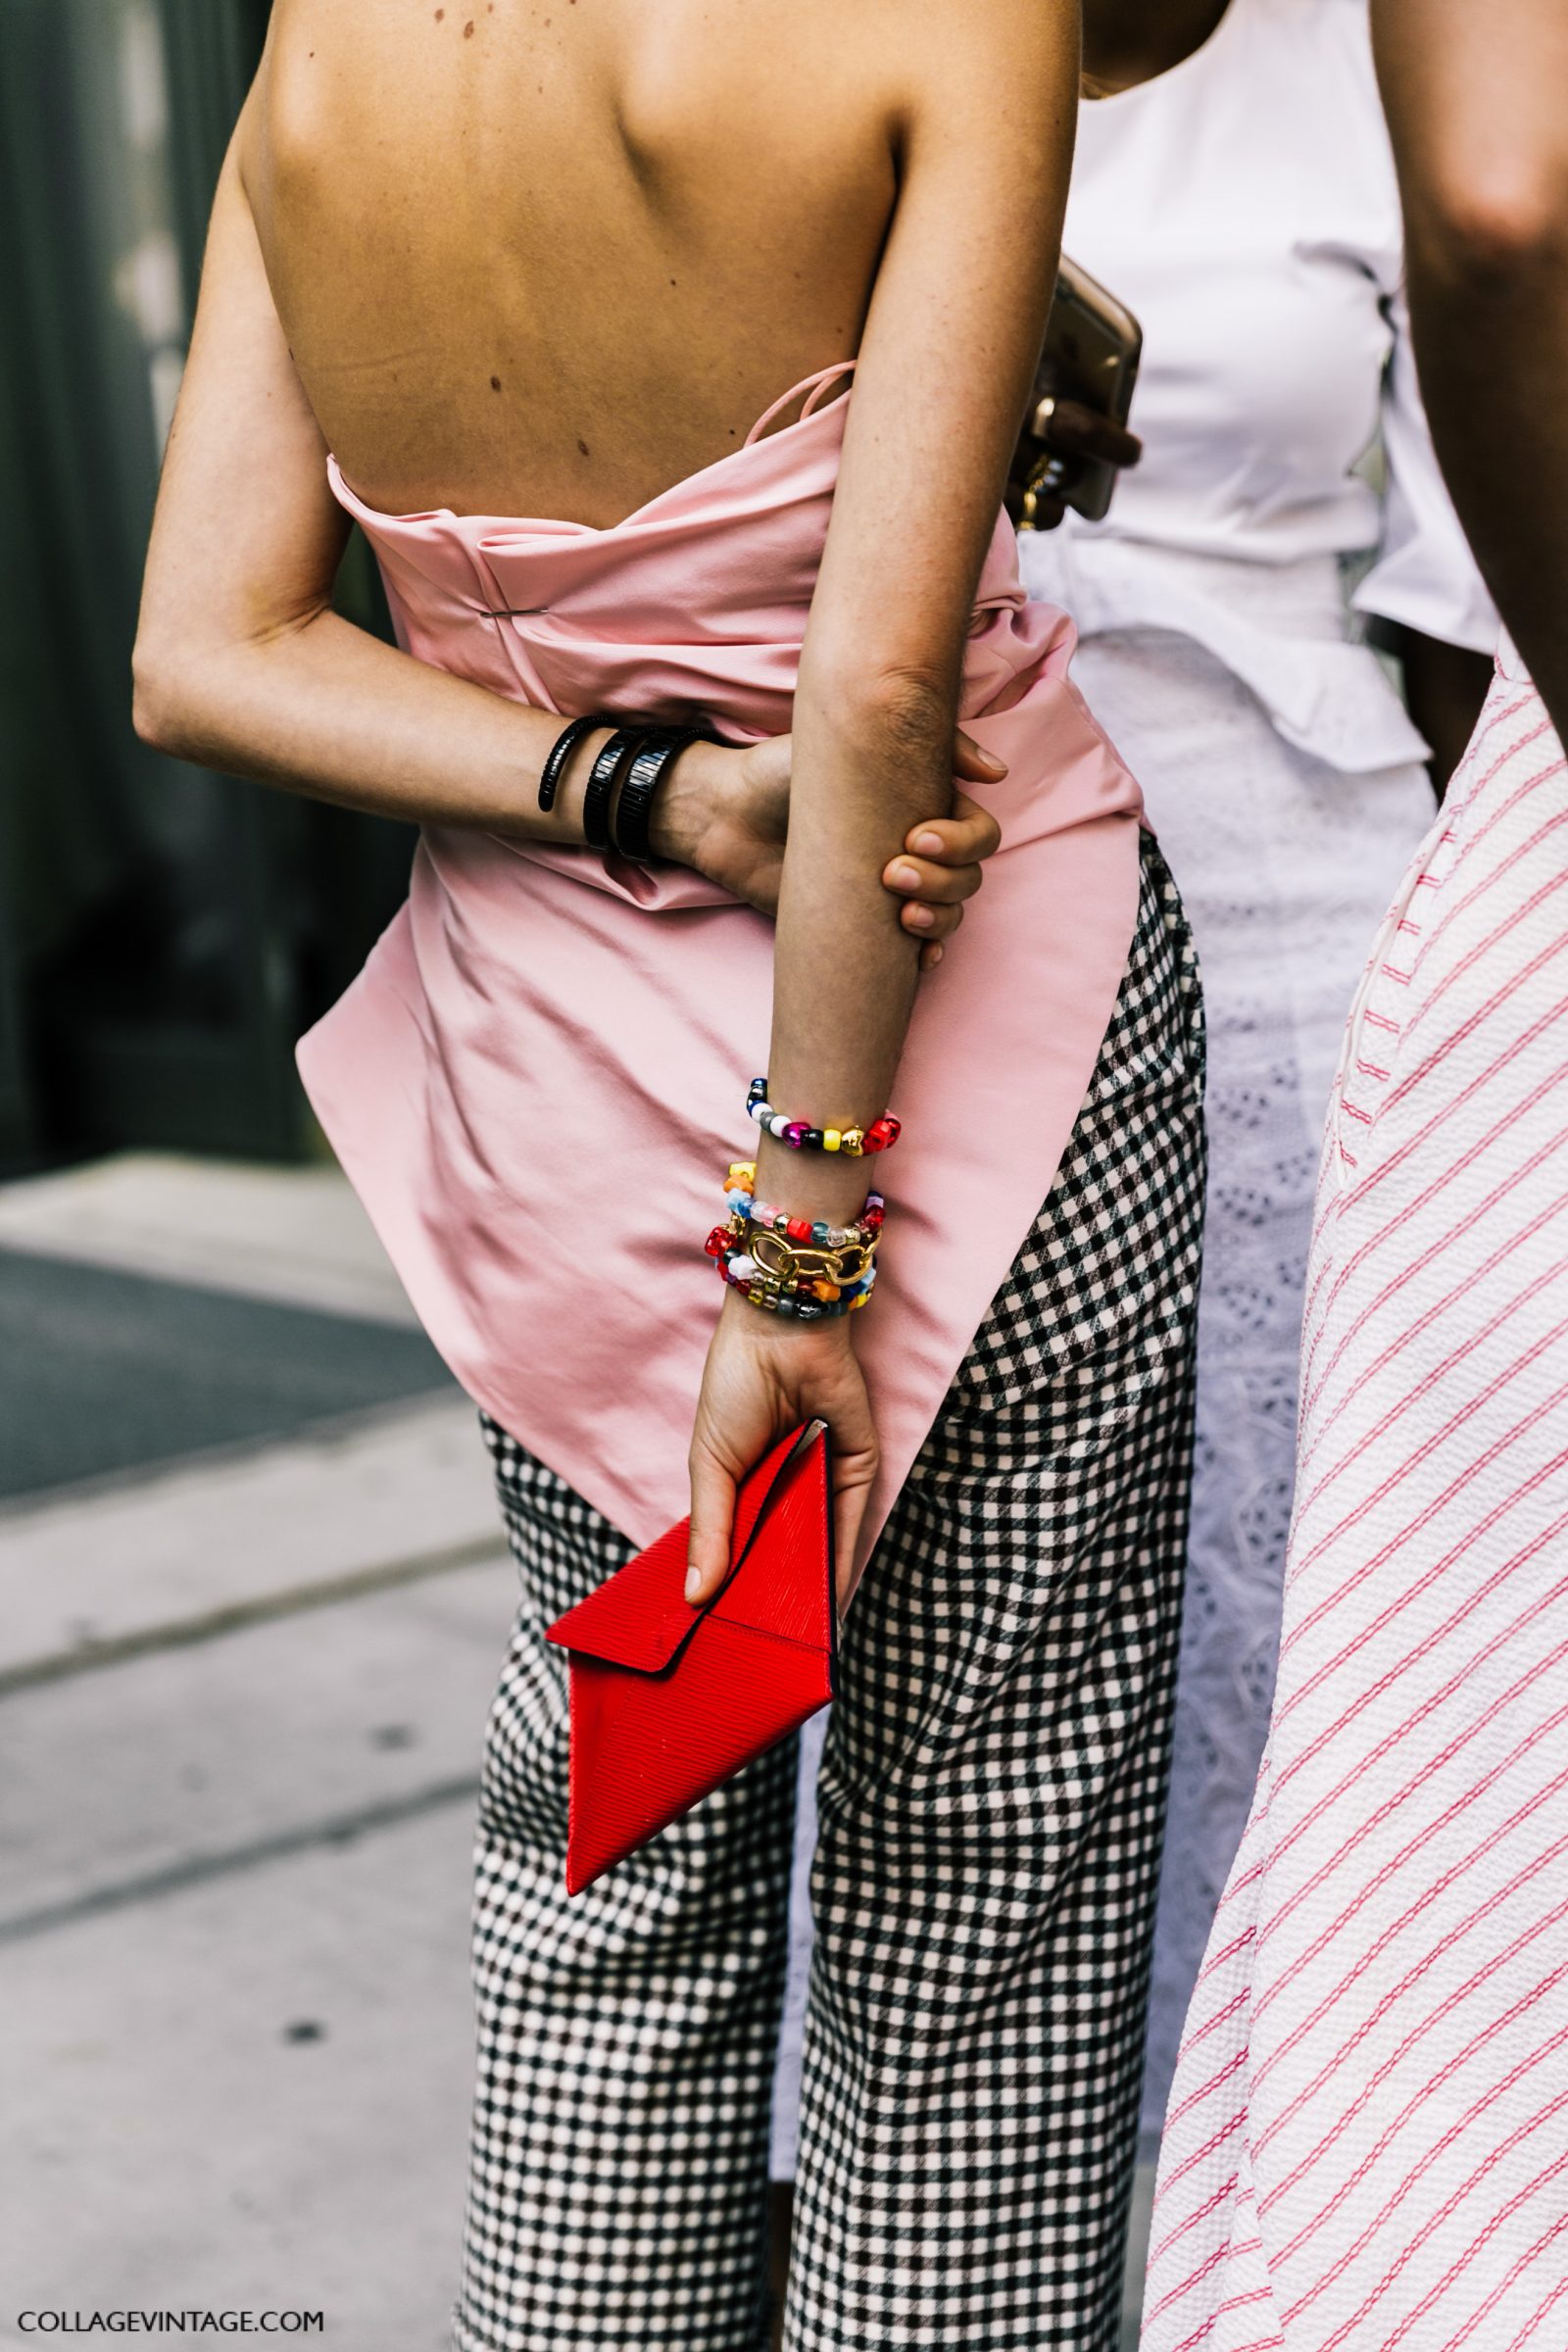 nyfw-new_york_fashion_week_ss17-street_style-outfits-collage_vintage-vintage-phillip_lim-the-row-proenza_schouler-rossie_aussolin-154